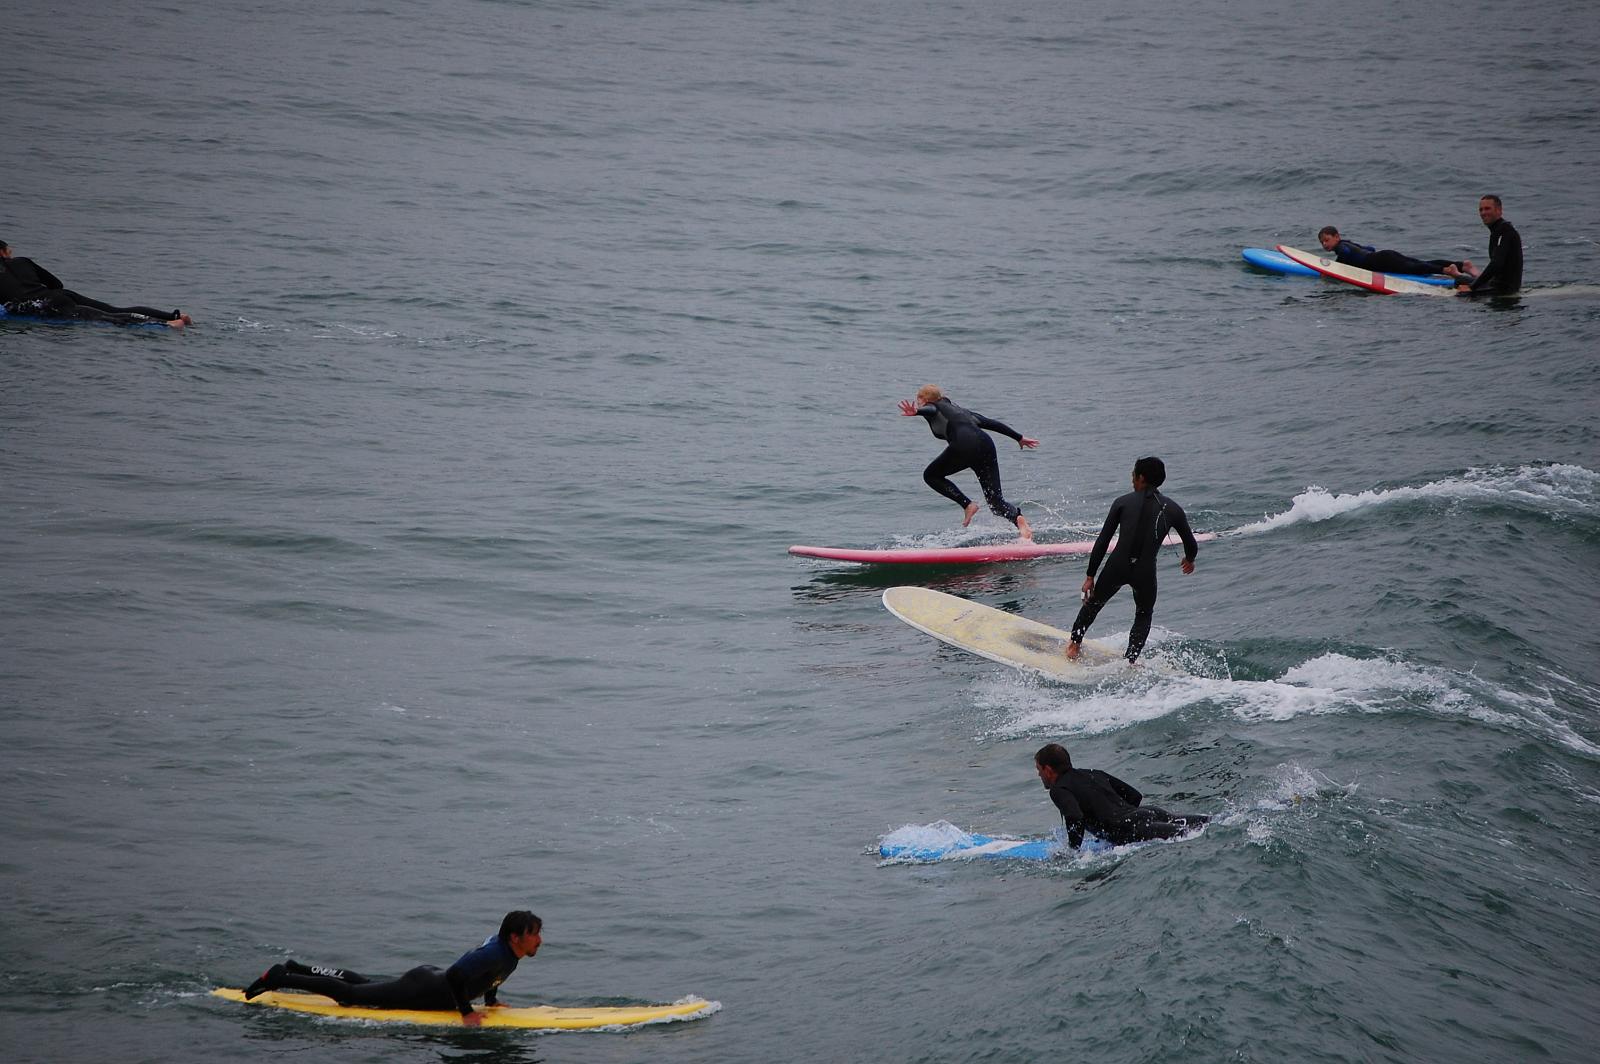 group of men standing on surfboards riding the same wave